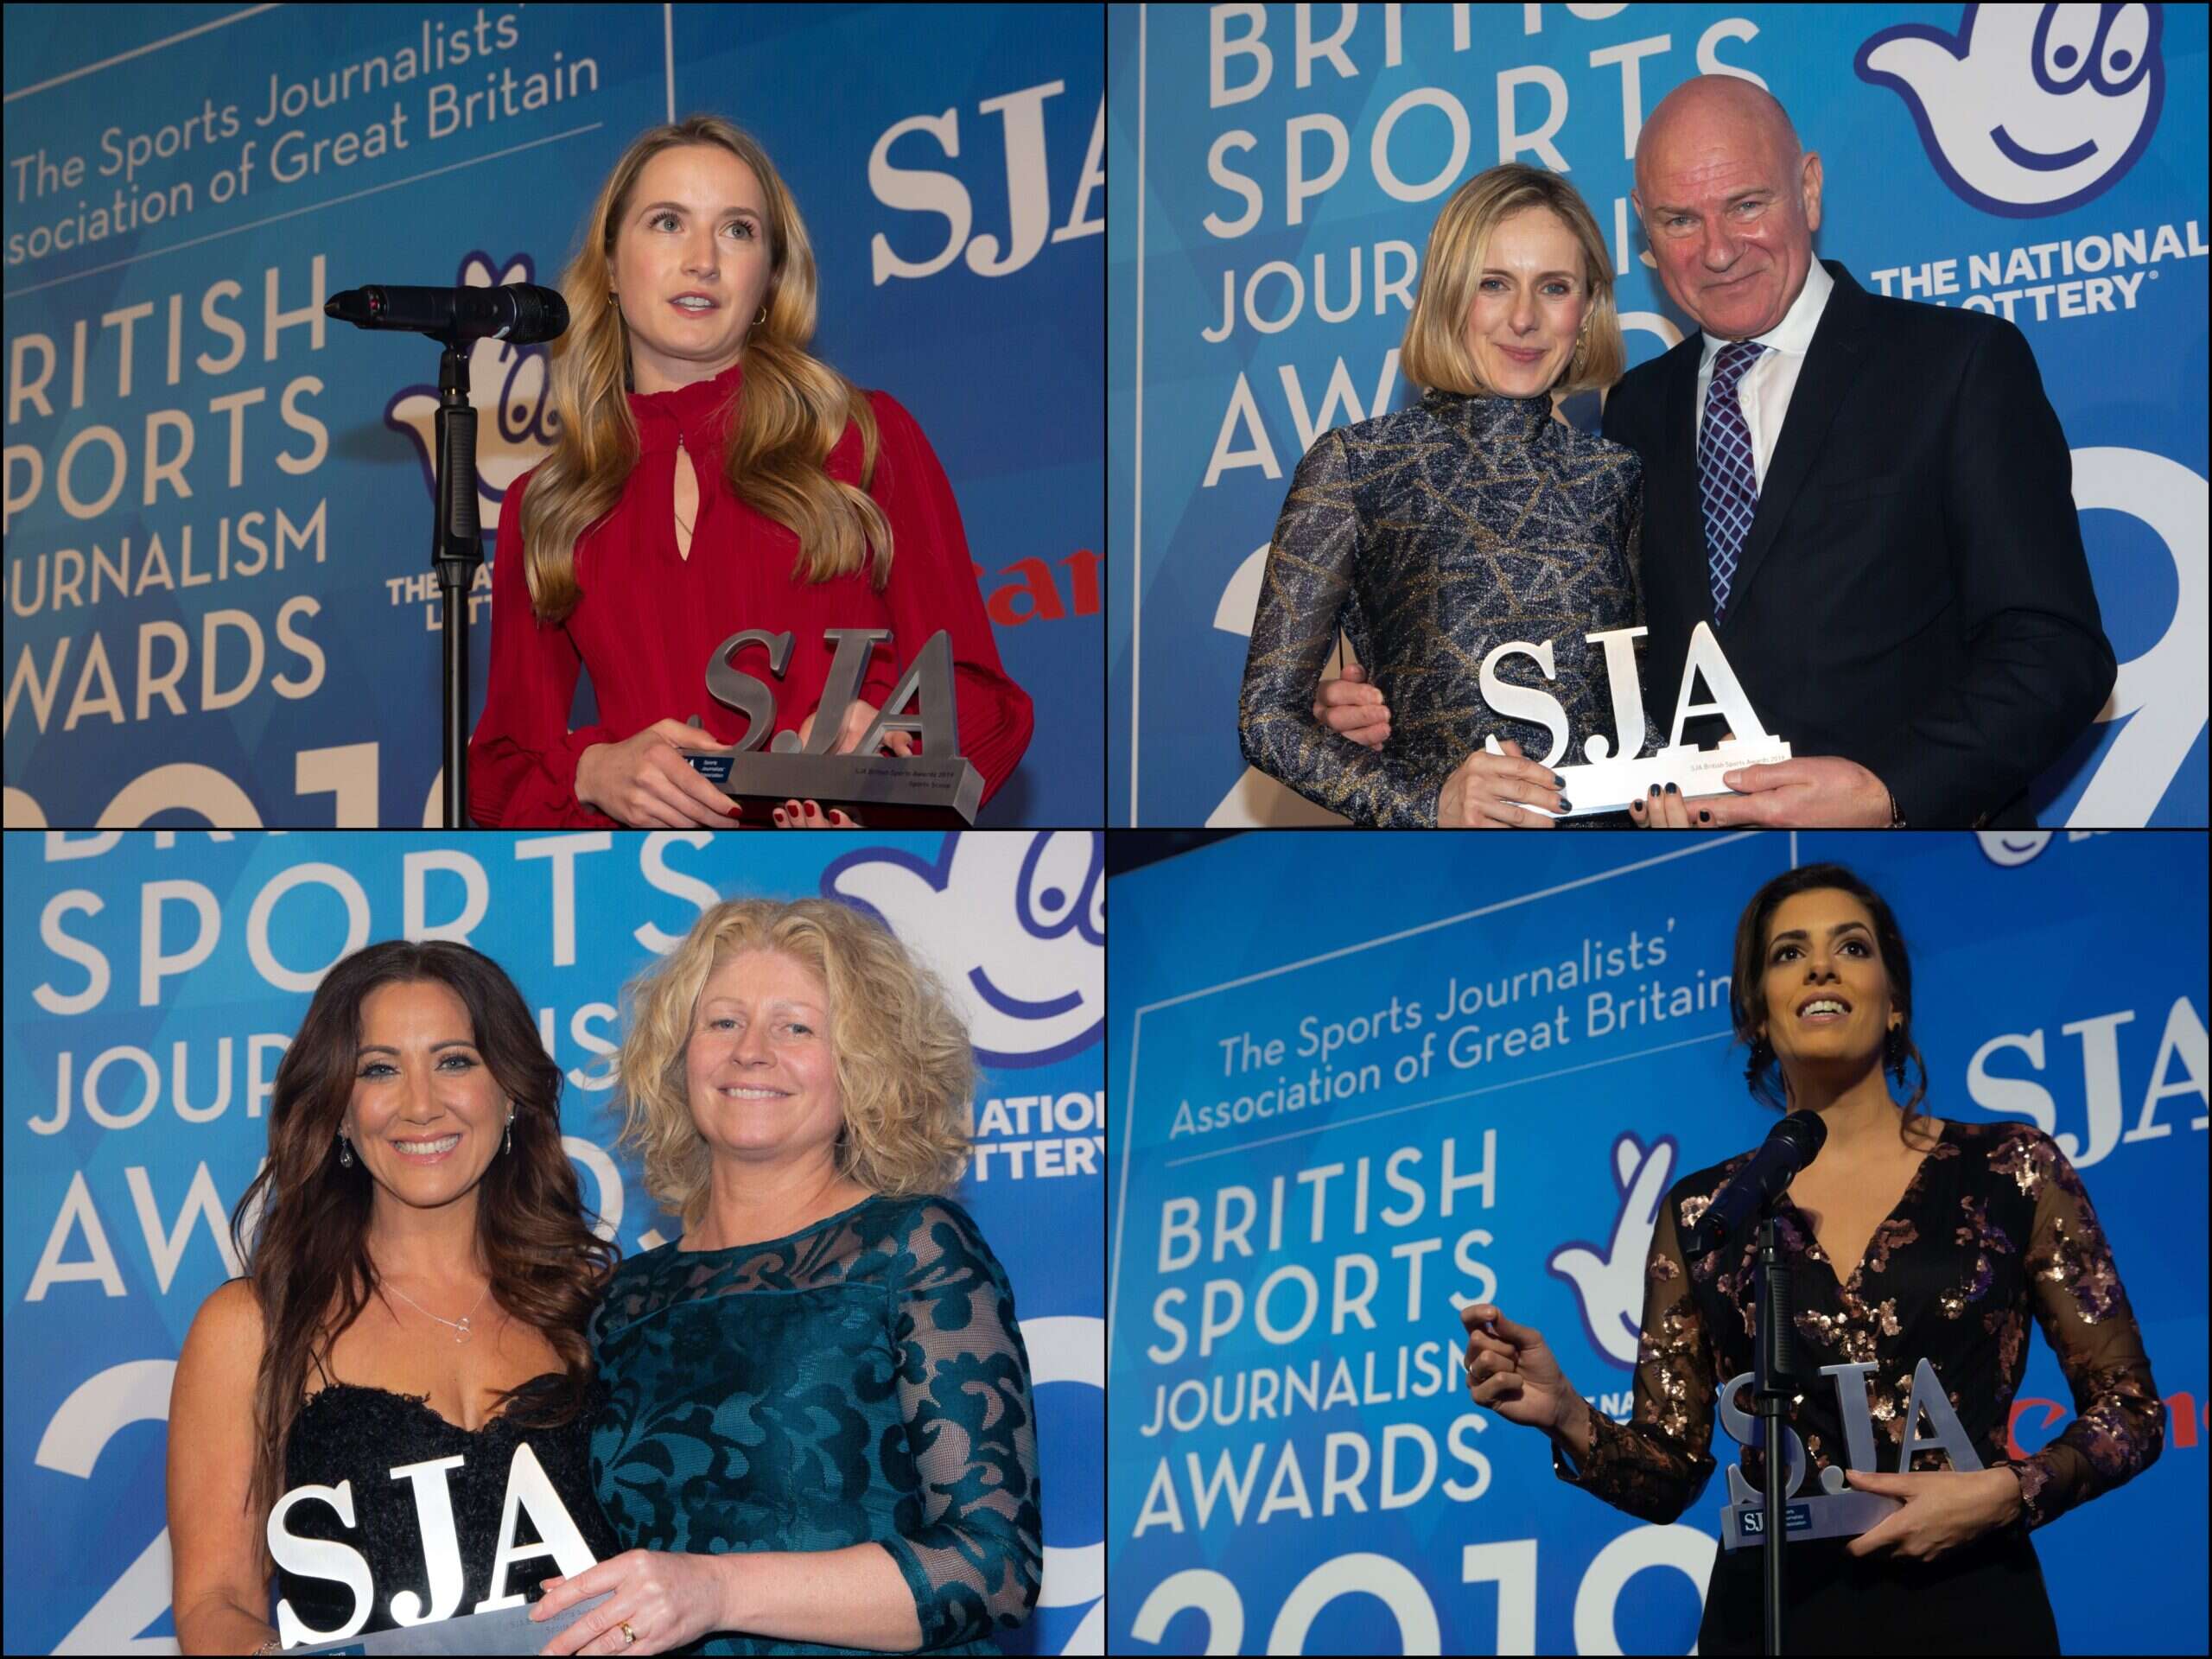 Double honours for Guardian's Marina Hyde as female winners make history at sports journalism awards